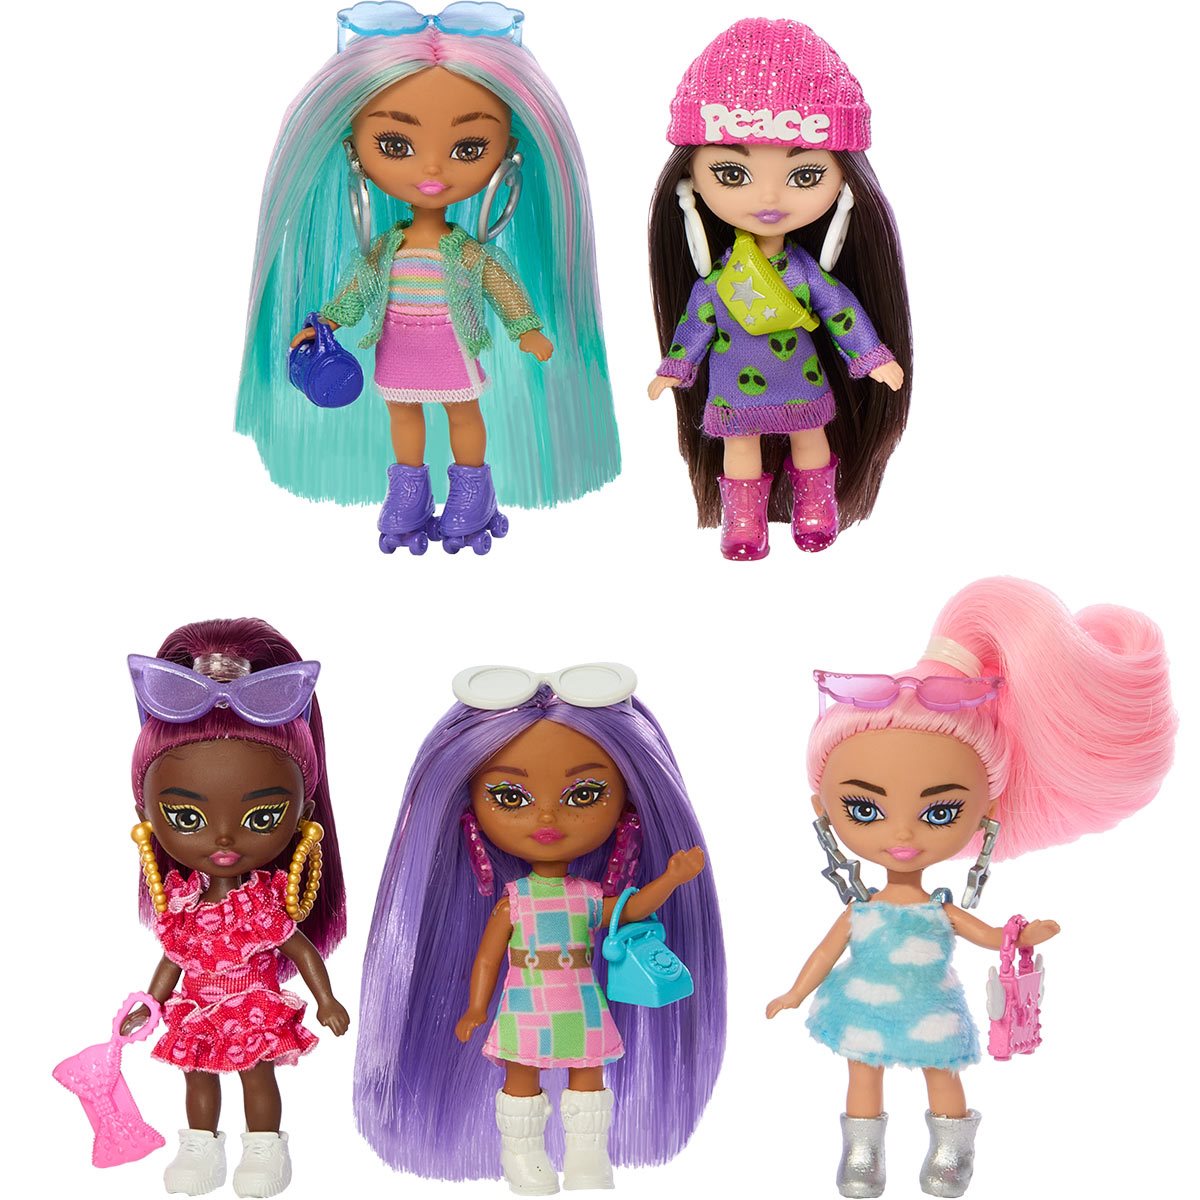 Barbie Extra Fly Mini Minis Doll 5-Pack - Entertainment Earth